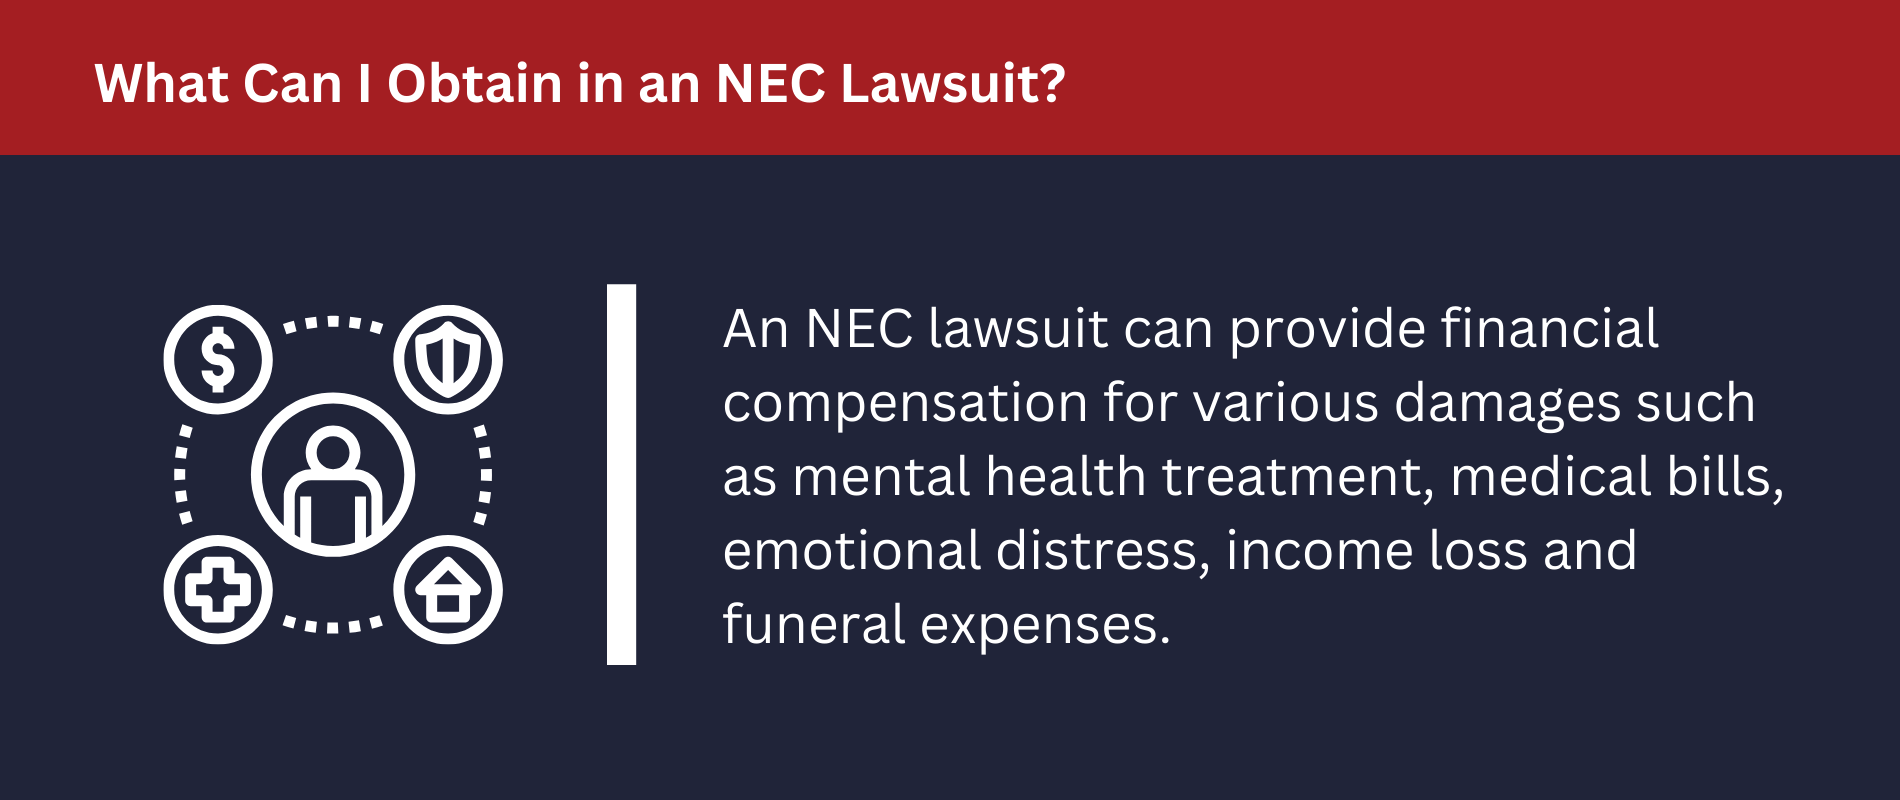 What Can I Obstain in an NEC Lawsuit? And NEC lawsuit can provide financial compensation for damages.